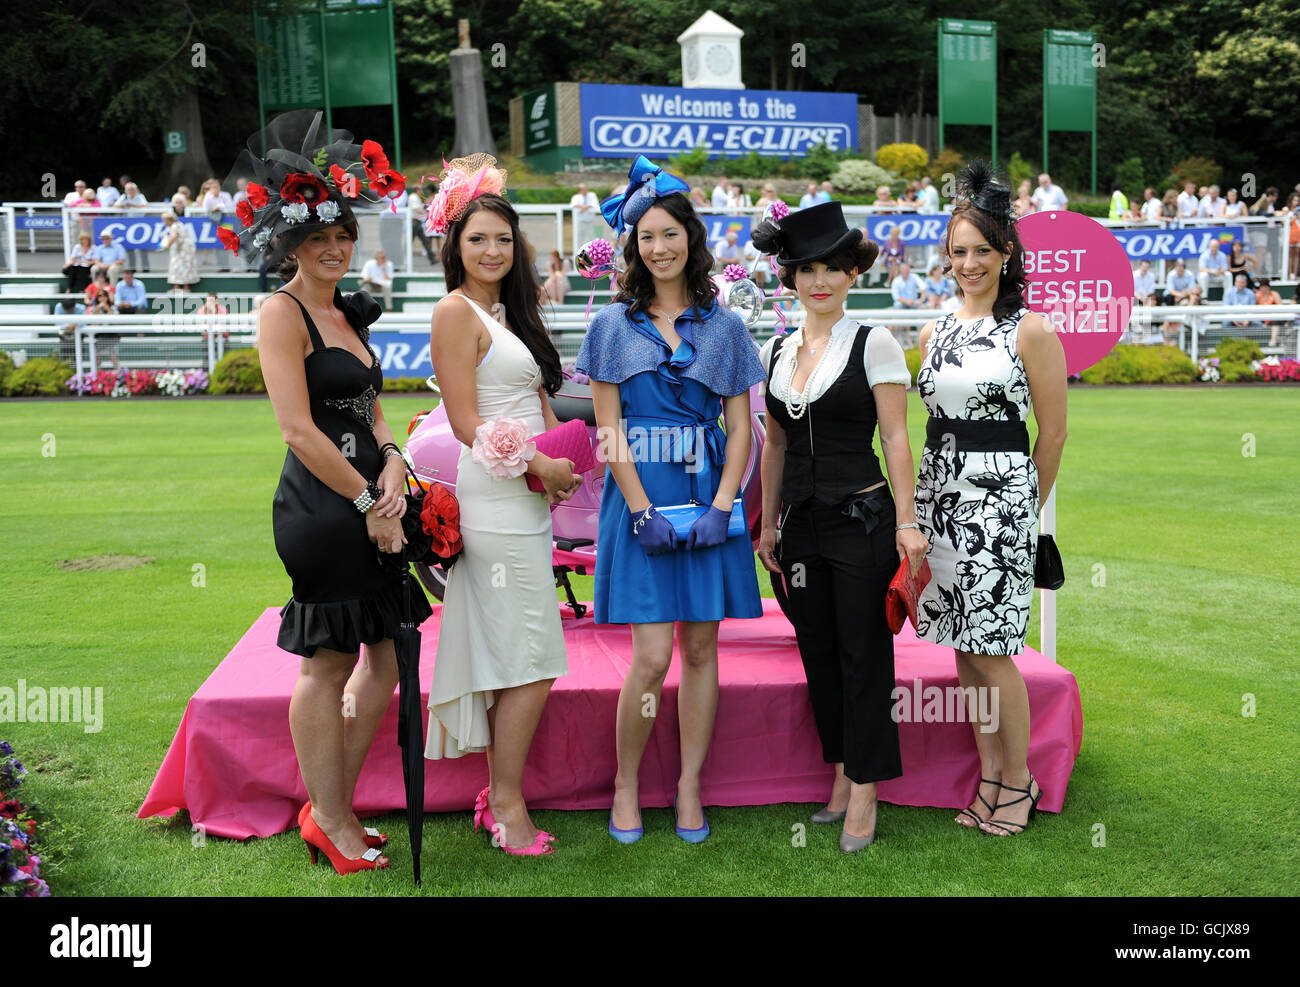 Horse Racing - Coral-Eclipse Day - Sandown Park. Racegoers take part in the Best Dressed Lady competition during the Coral-Eclipse Day at Sandown Park Stock Photo